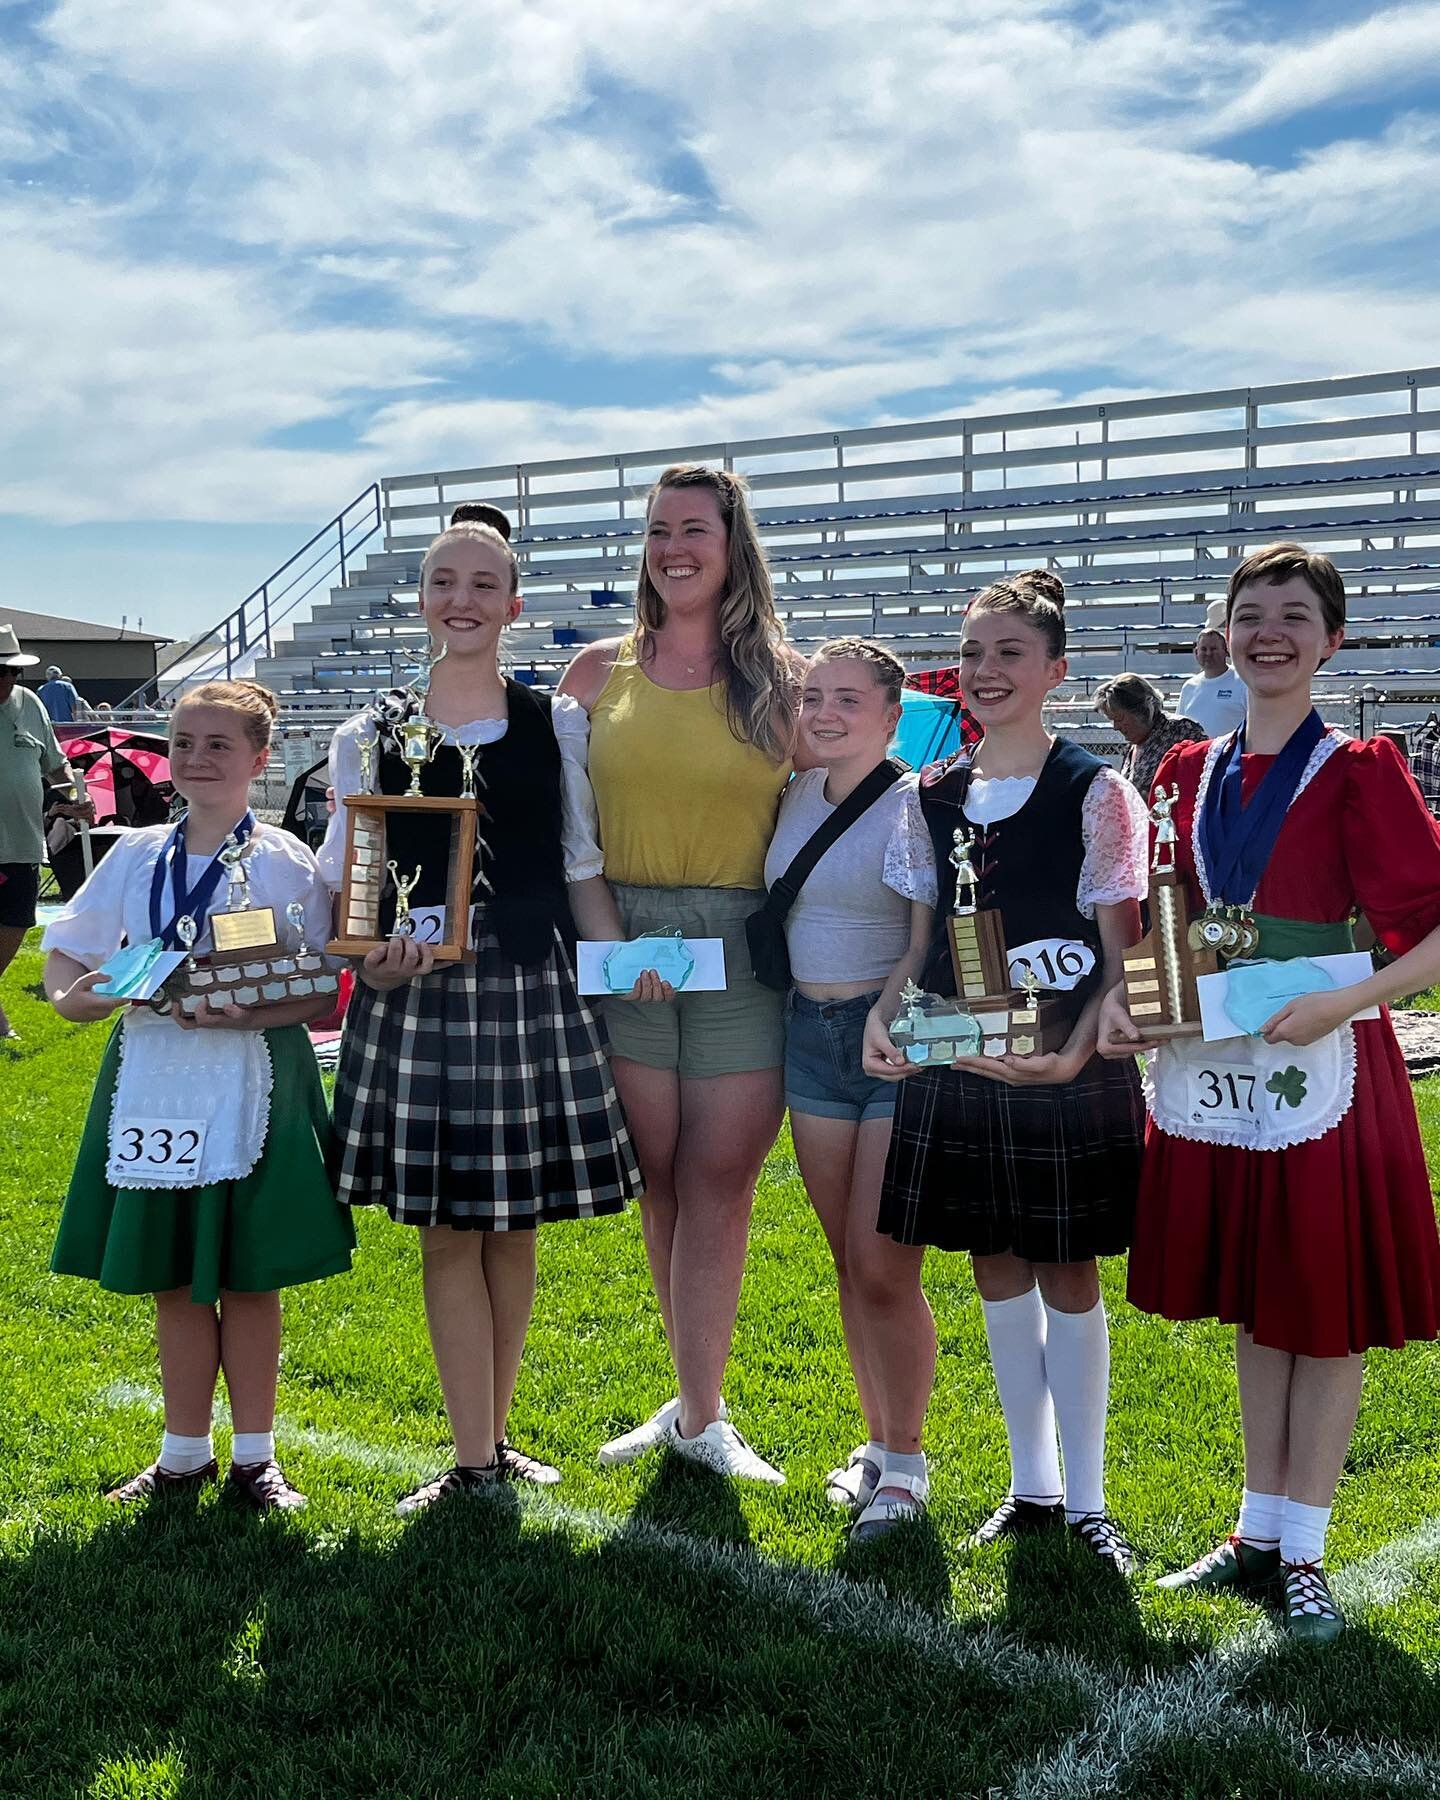 Great day at Calgary Highland Games today! Aggregates we&rsquo;re won my Briar, Braylin, Brigit and Rowan! Onto Canmore Highland Games tomorrow! Good luck to all dancers competing!